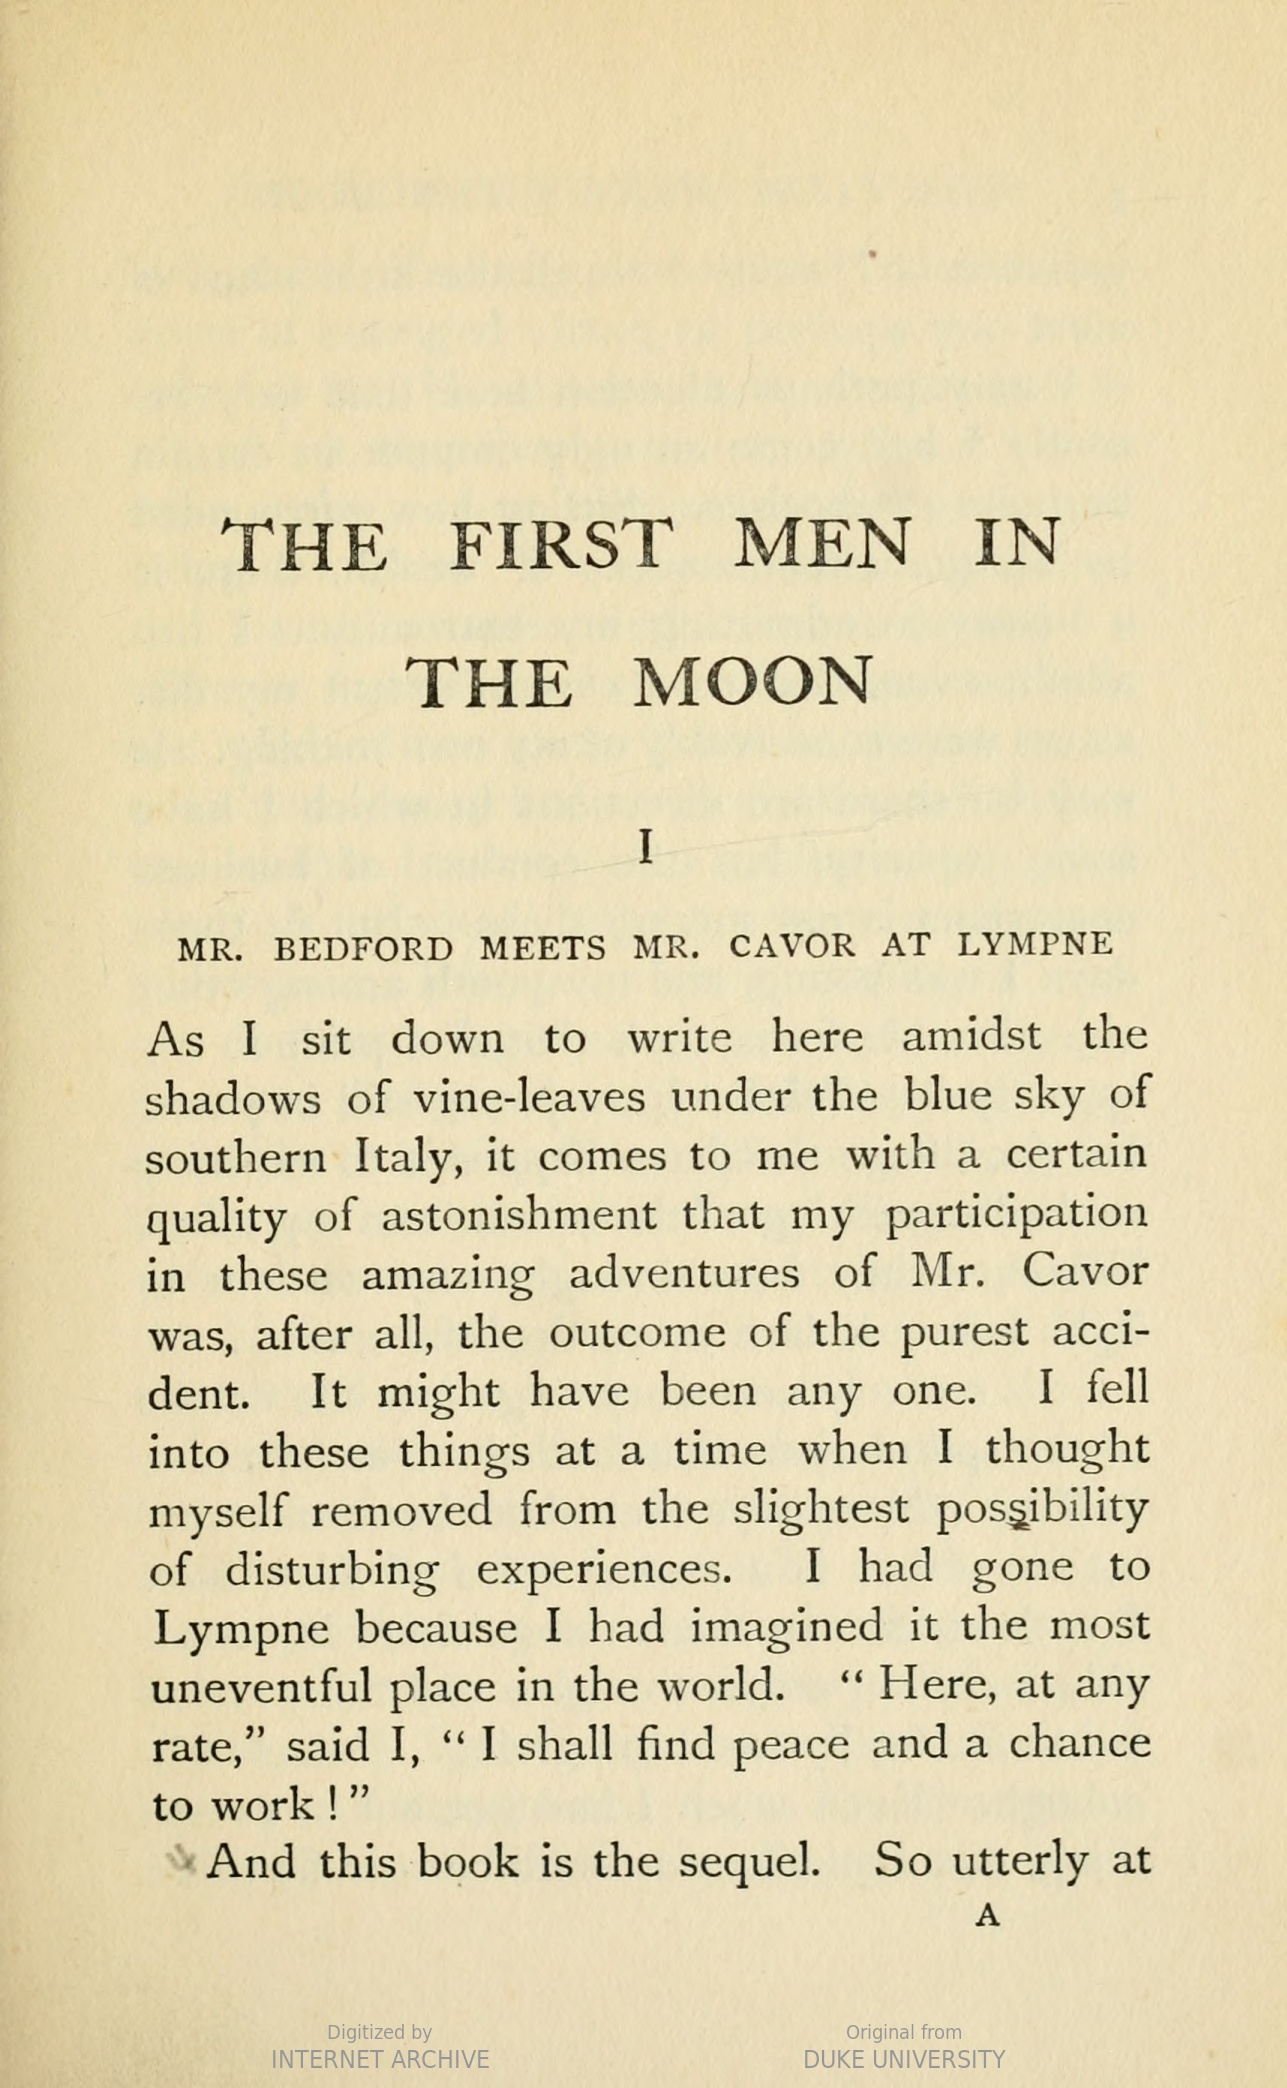 A page from the print edition of H. G. Wells's The First Men in the Moon.